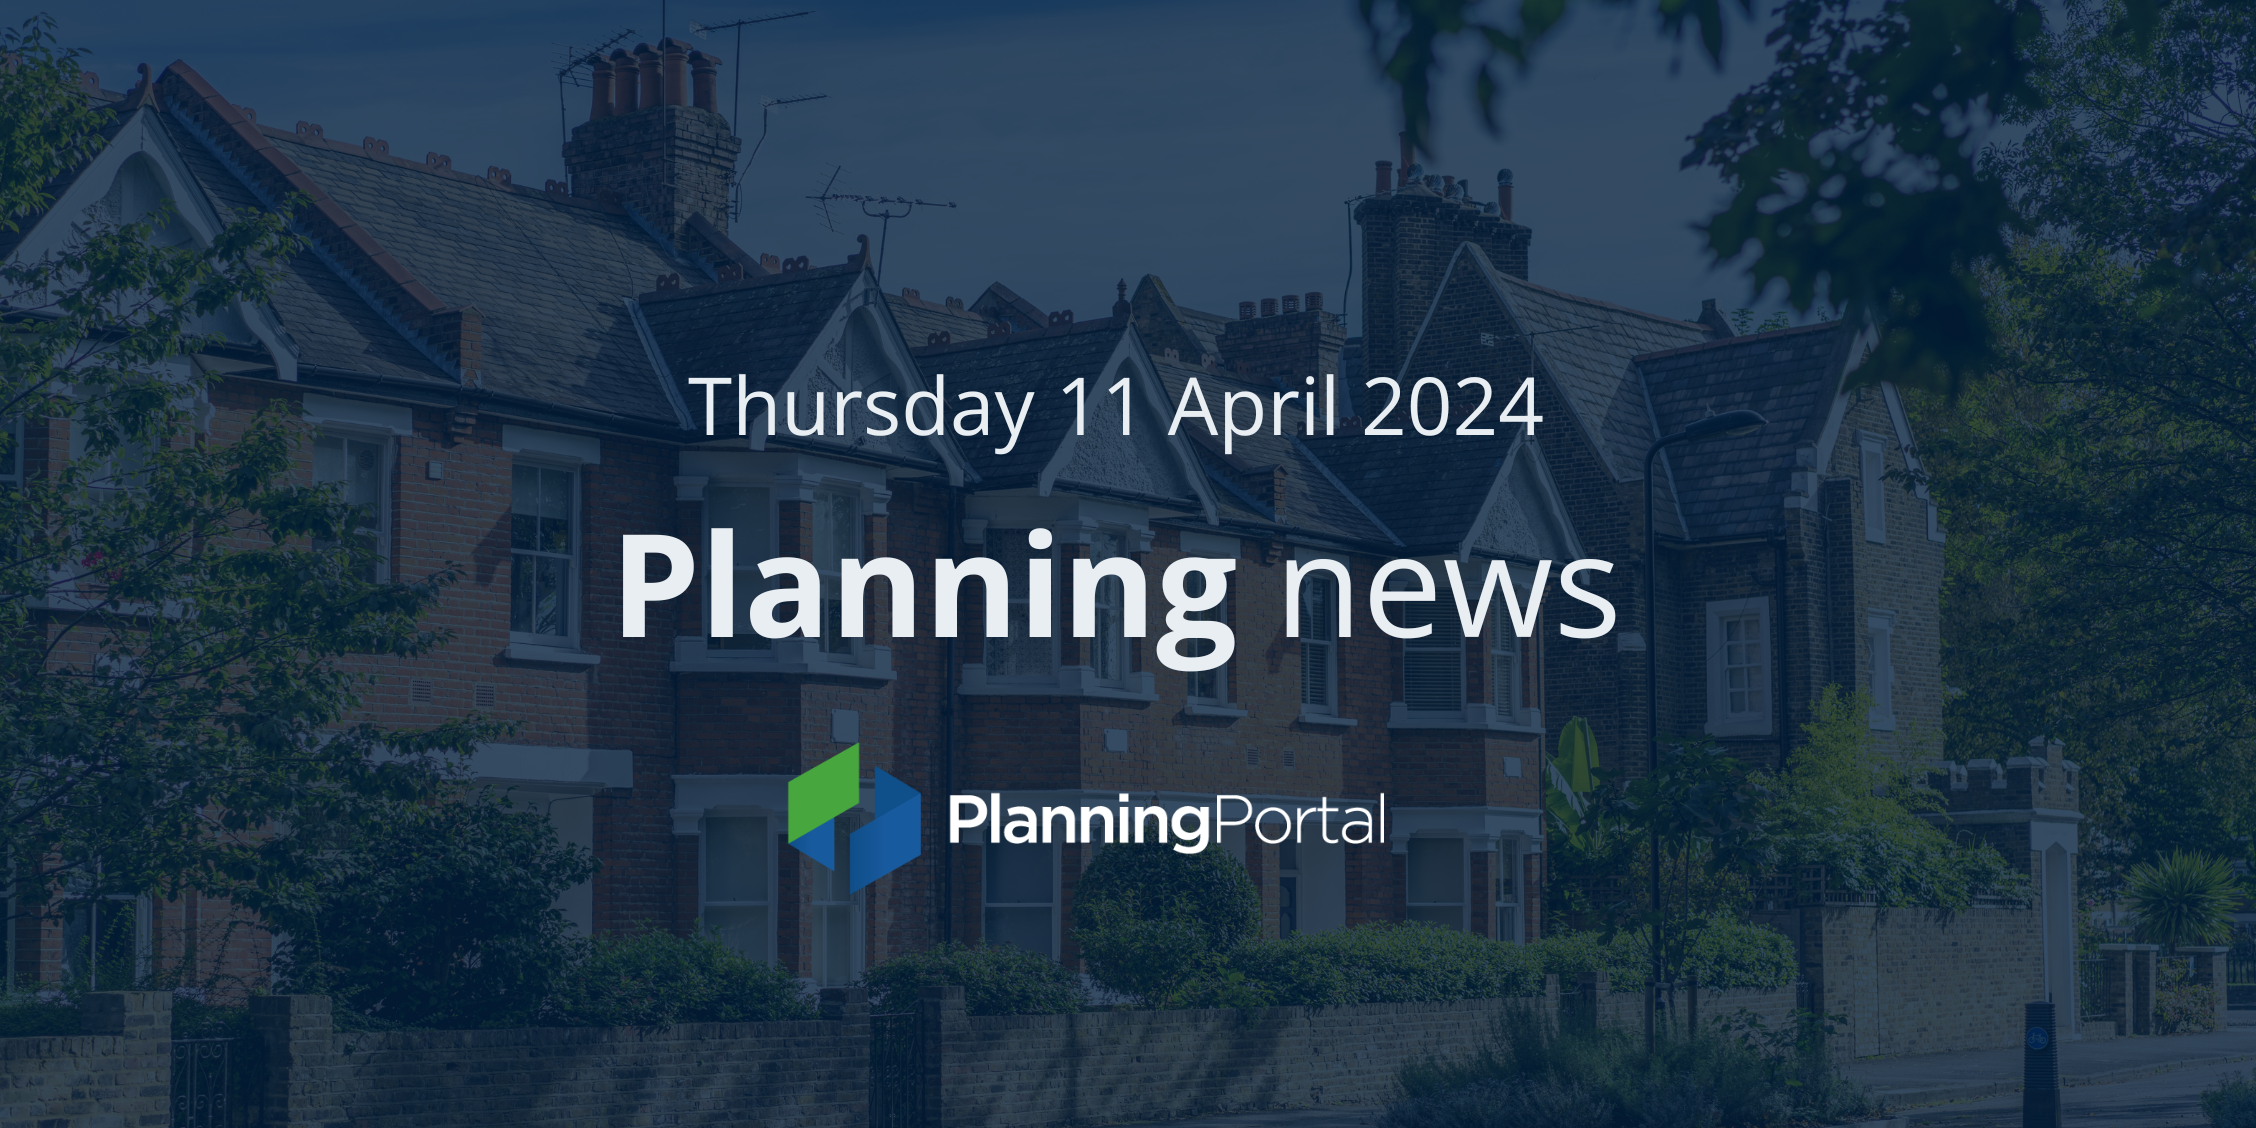 Planning Portal weekly news hero banner depicting Planning Portal logo, date and UK housing imagery